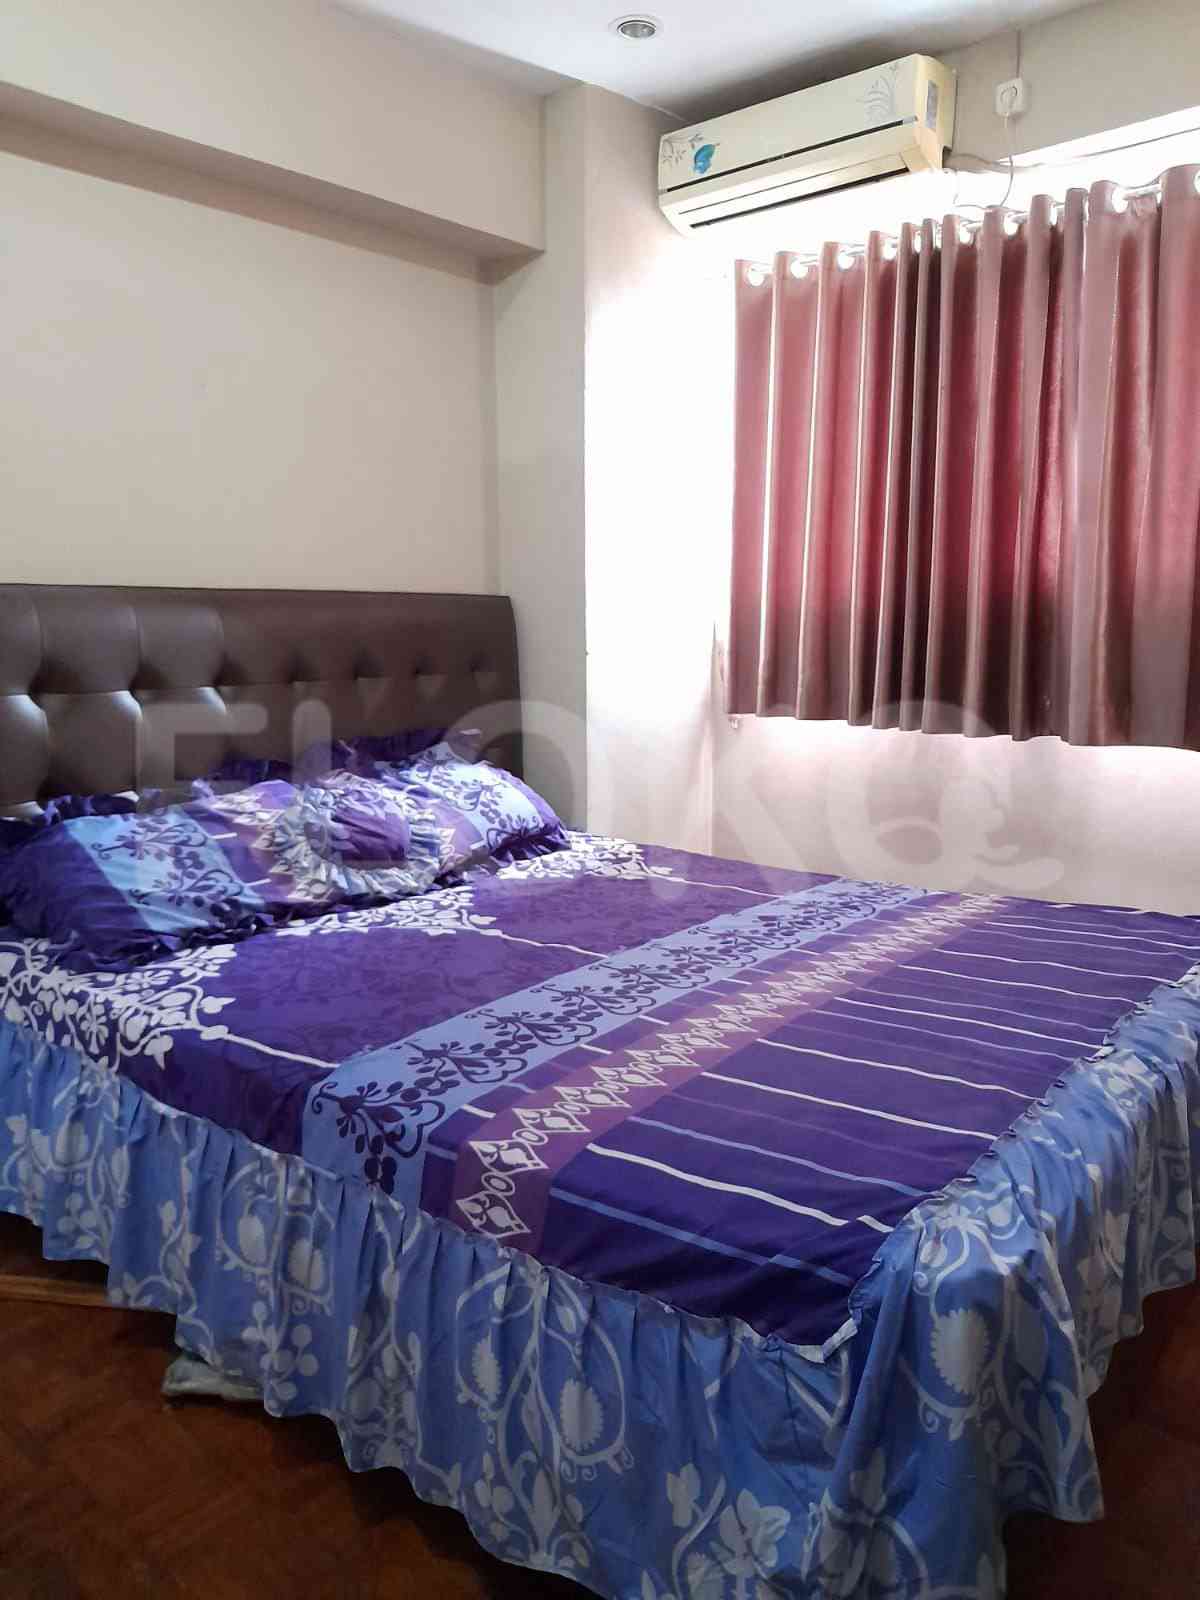 2 Bedroom on 11th Floor for Rent in Sentra Timur Residence - fcaf15 4